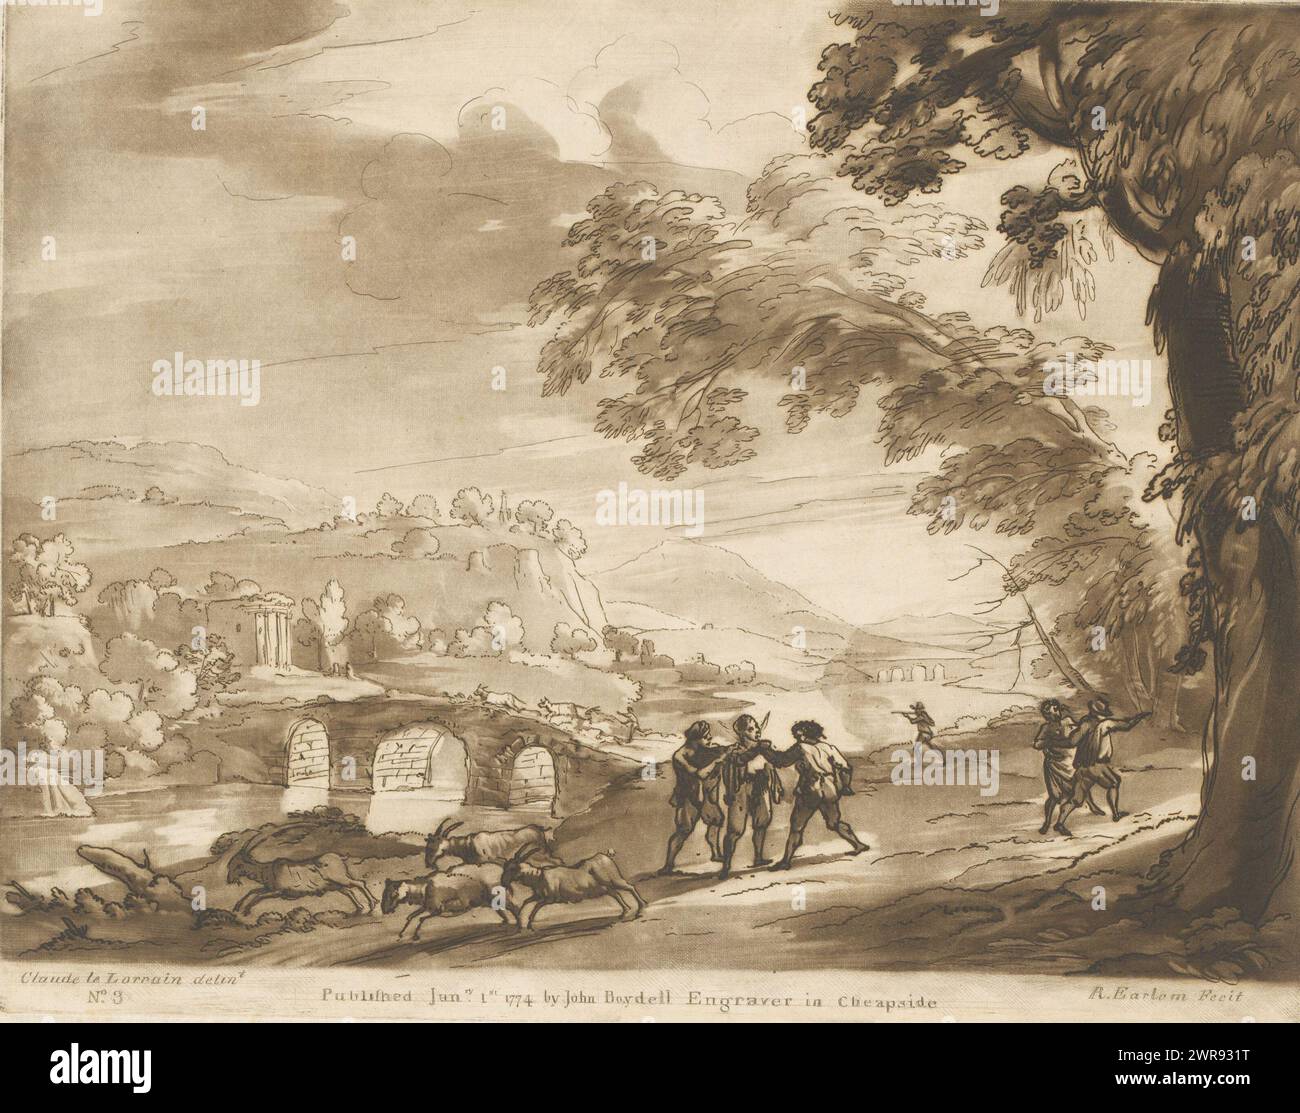 Landscape with stone bridge over river, bandits and fleeing goats, Prints after drawings by Claude Lorrain (series title), Liber Veritatis. Or a Collection of Two Hundred Prints, after the original designs of Claude le Lorrain (...) (series title), Centrally two people robbing a third person. On the right a man shooting towards a shepherd and group of goats., print maker: Richard Earlom, after drawing by: Claude Lorrain, publisher: John Boydell, London, 1-Jan-1774, paper, etching, height 202 mm × width 257 mm, print Stock Photo